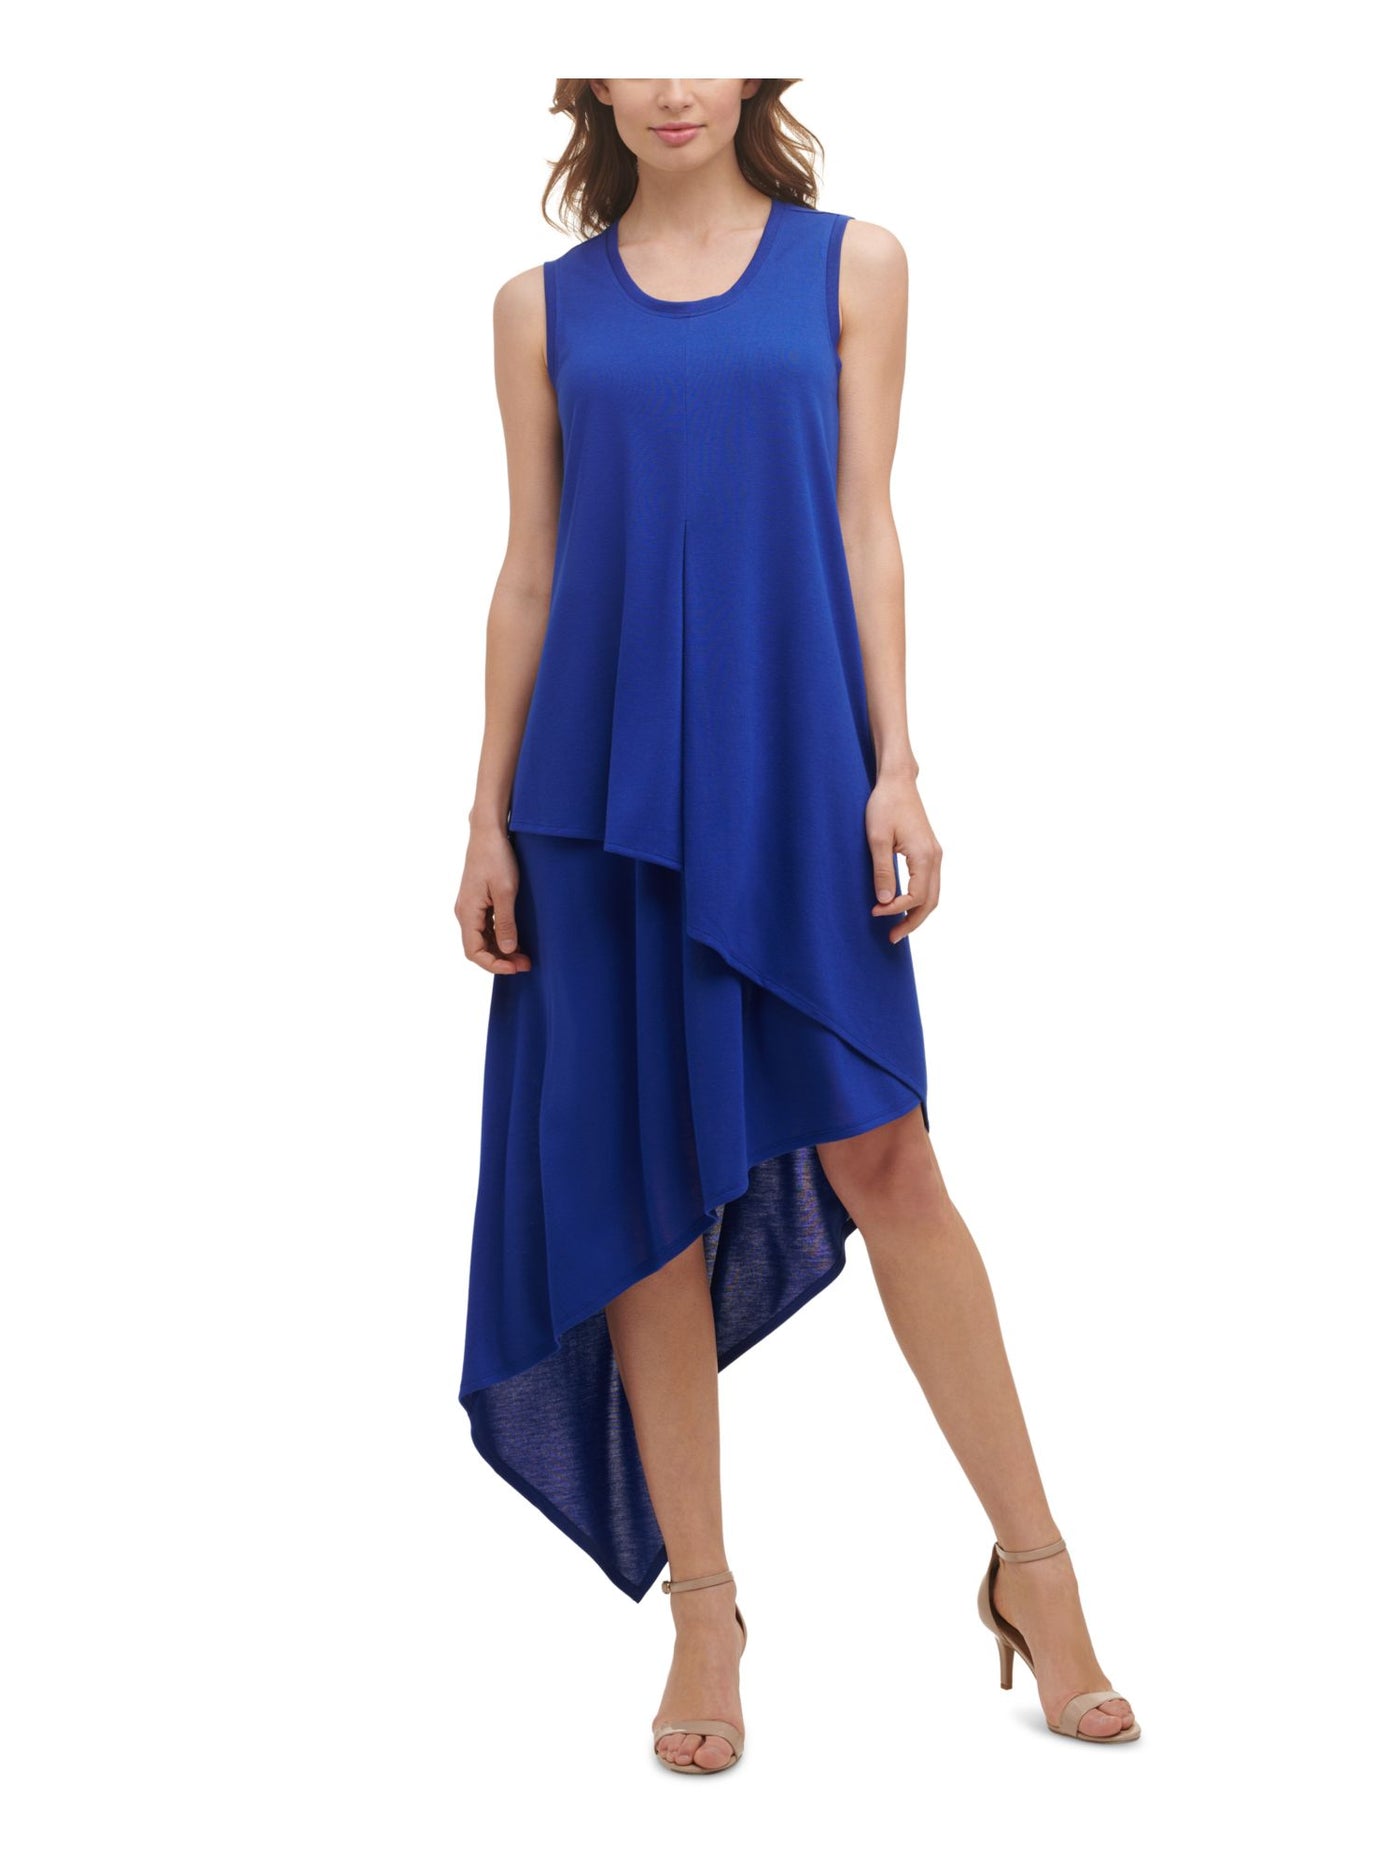 KENSIE Womens Blue Jersey Pleated Pullover Styling Unlined Sleeveless Jewel Neck Maxi Evening Hi-Lo Dress L